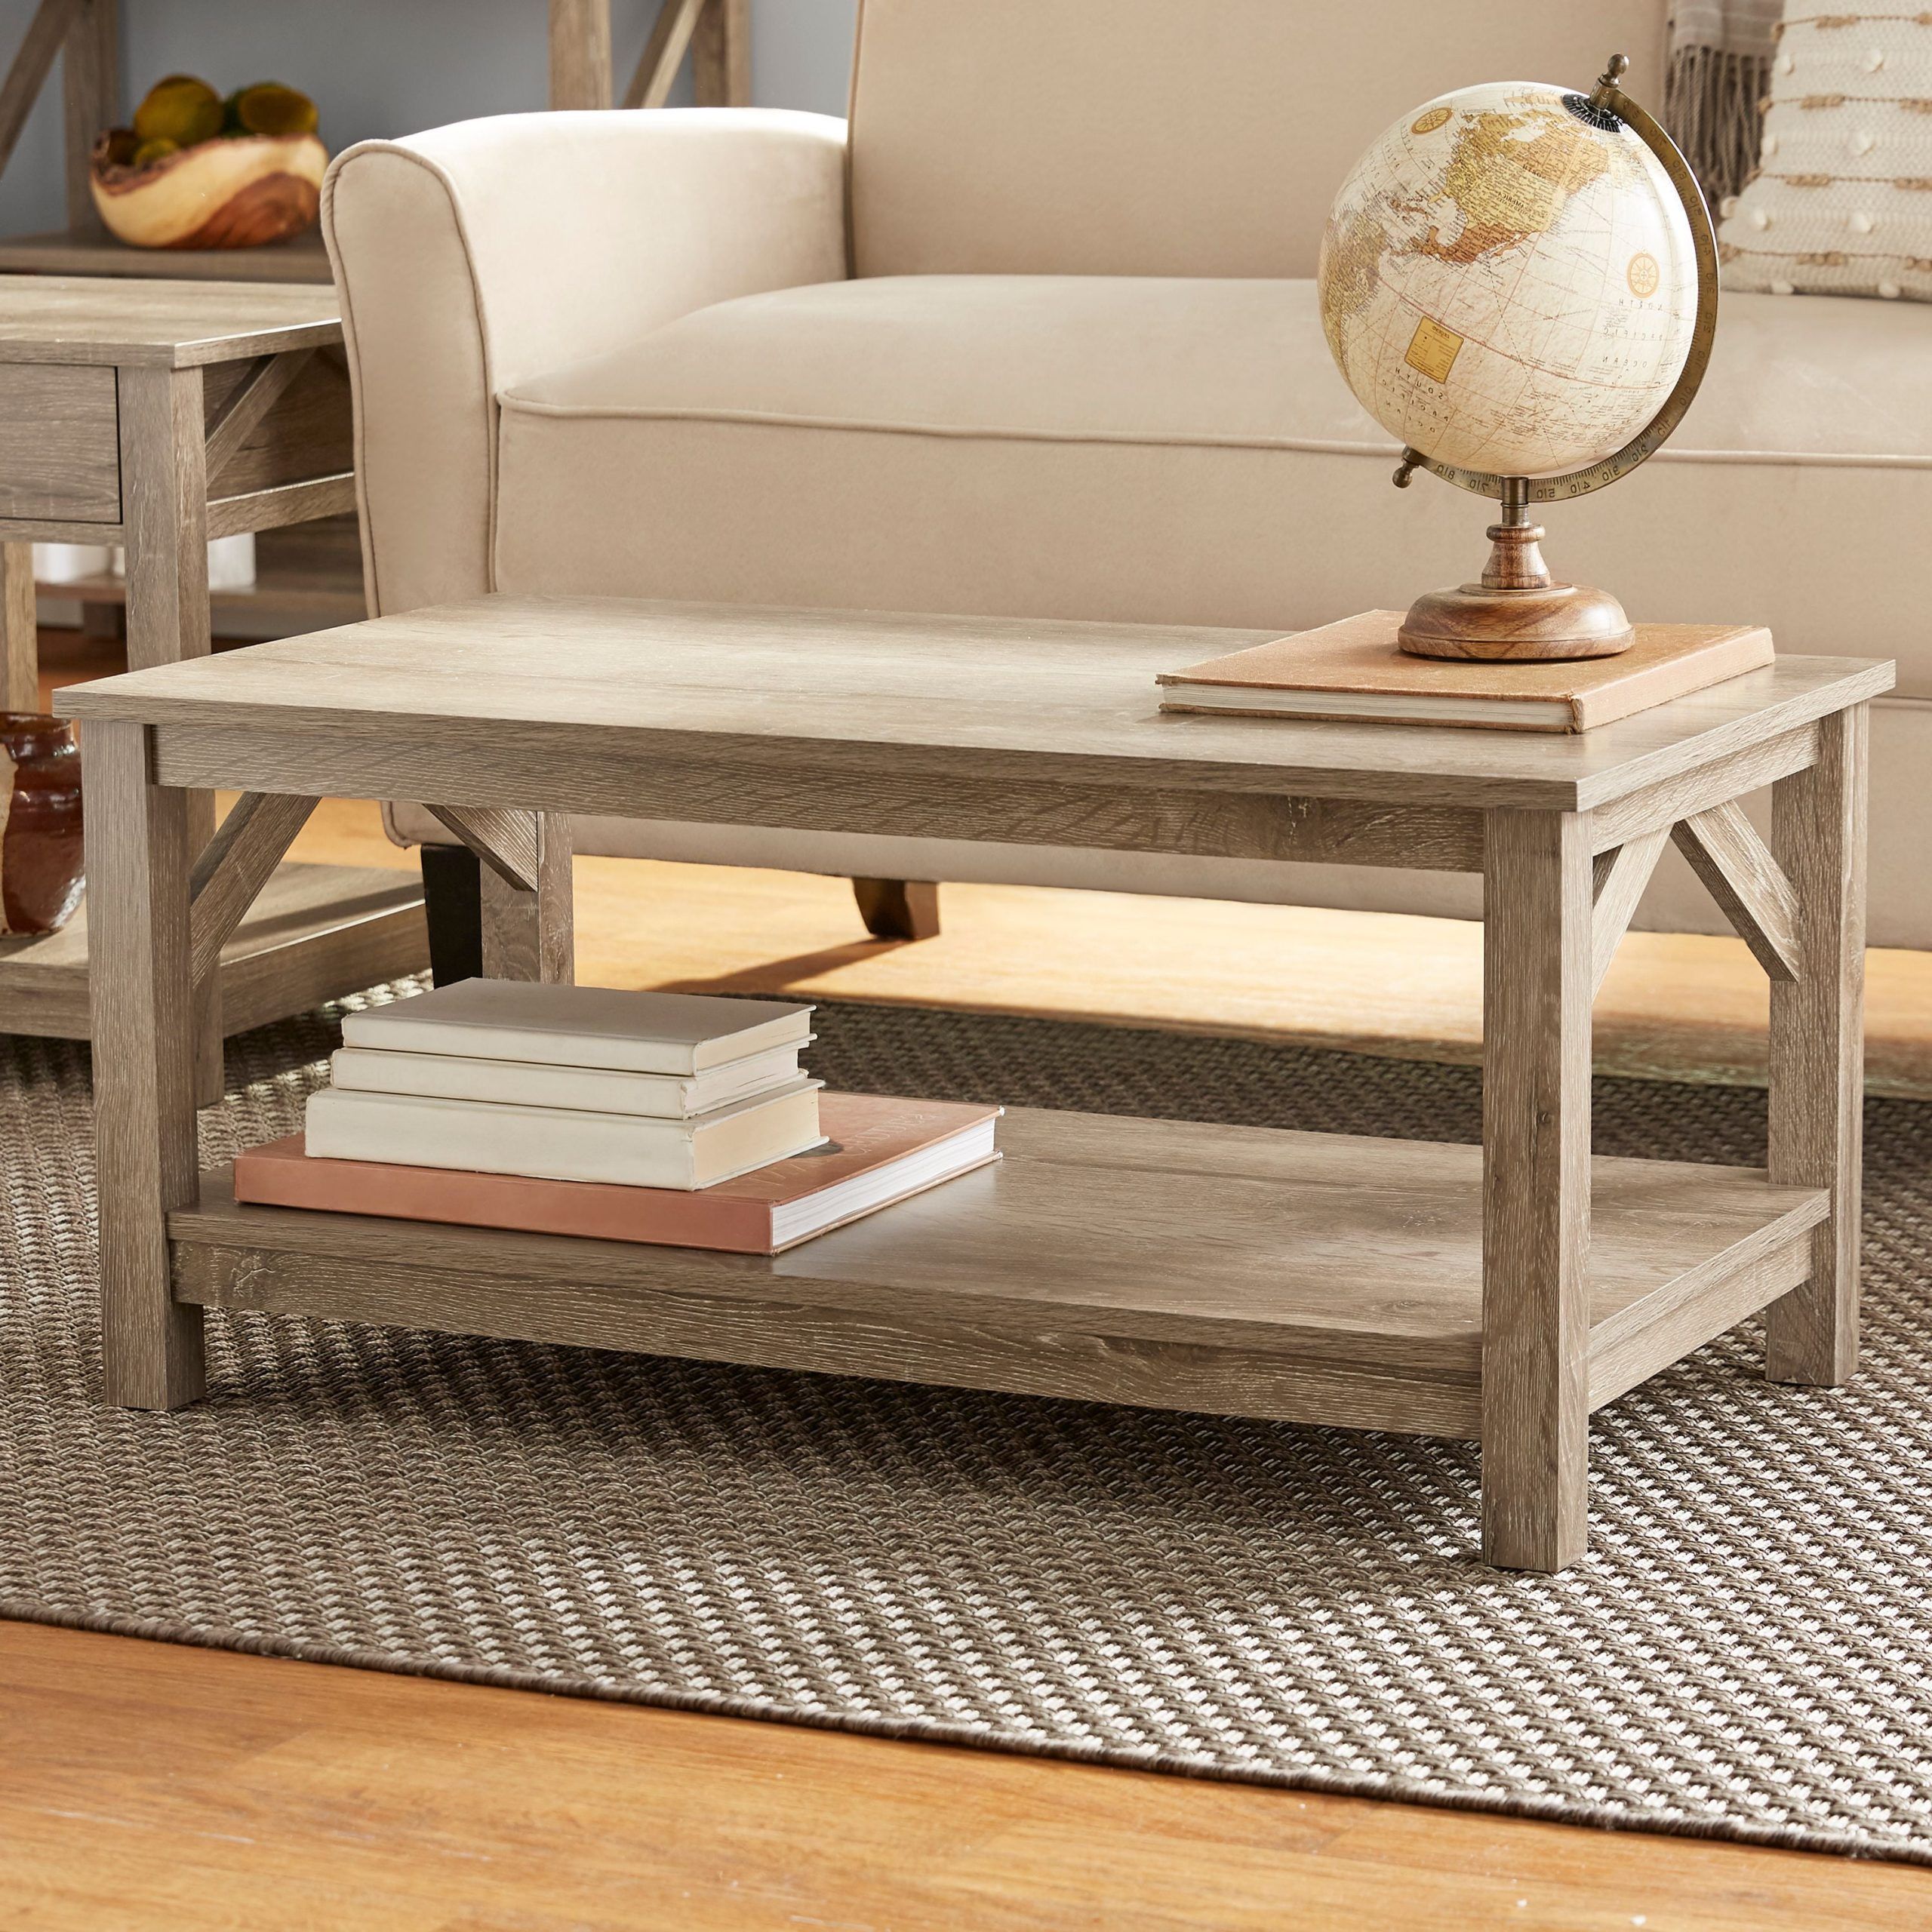 Mainstays Aston Mills Rustic Farmhouse Coffee Table, Rustic Brown With Fashionable Living Room Farmhouse Coffee Tables (View 12 of 15)